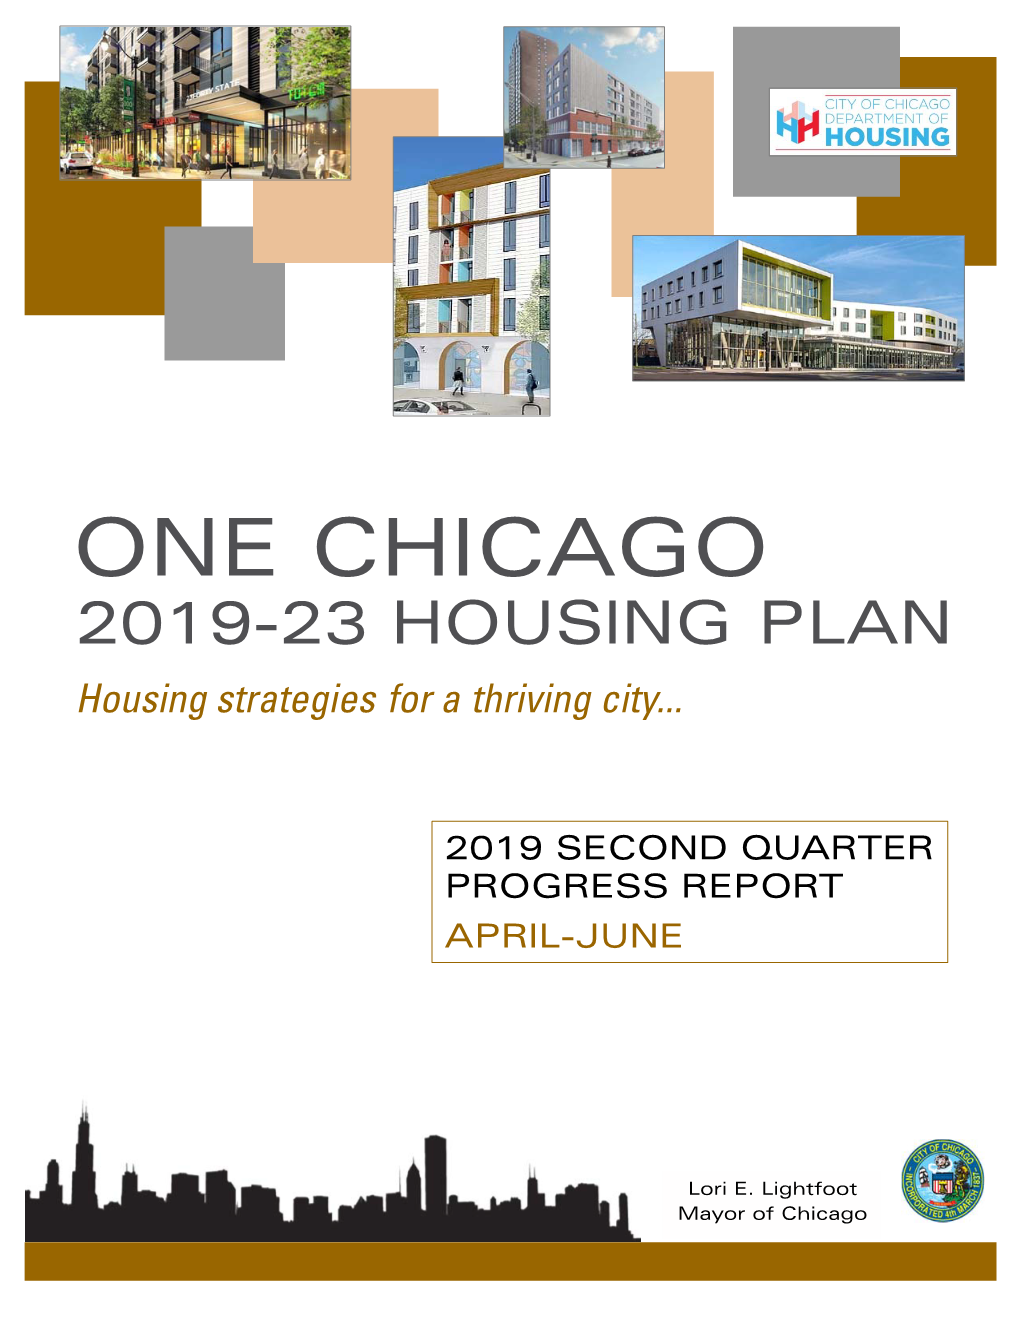 ONE CHICAGO 2019-23 HOUSING PLAN Housing Strategies for a Thriving City